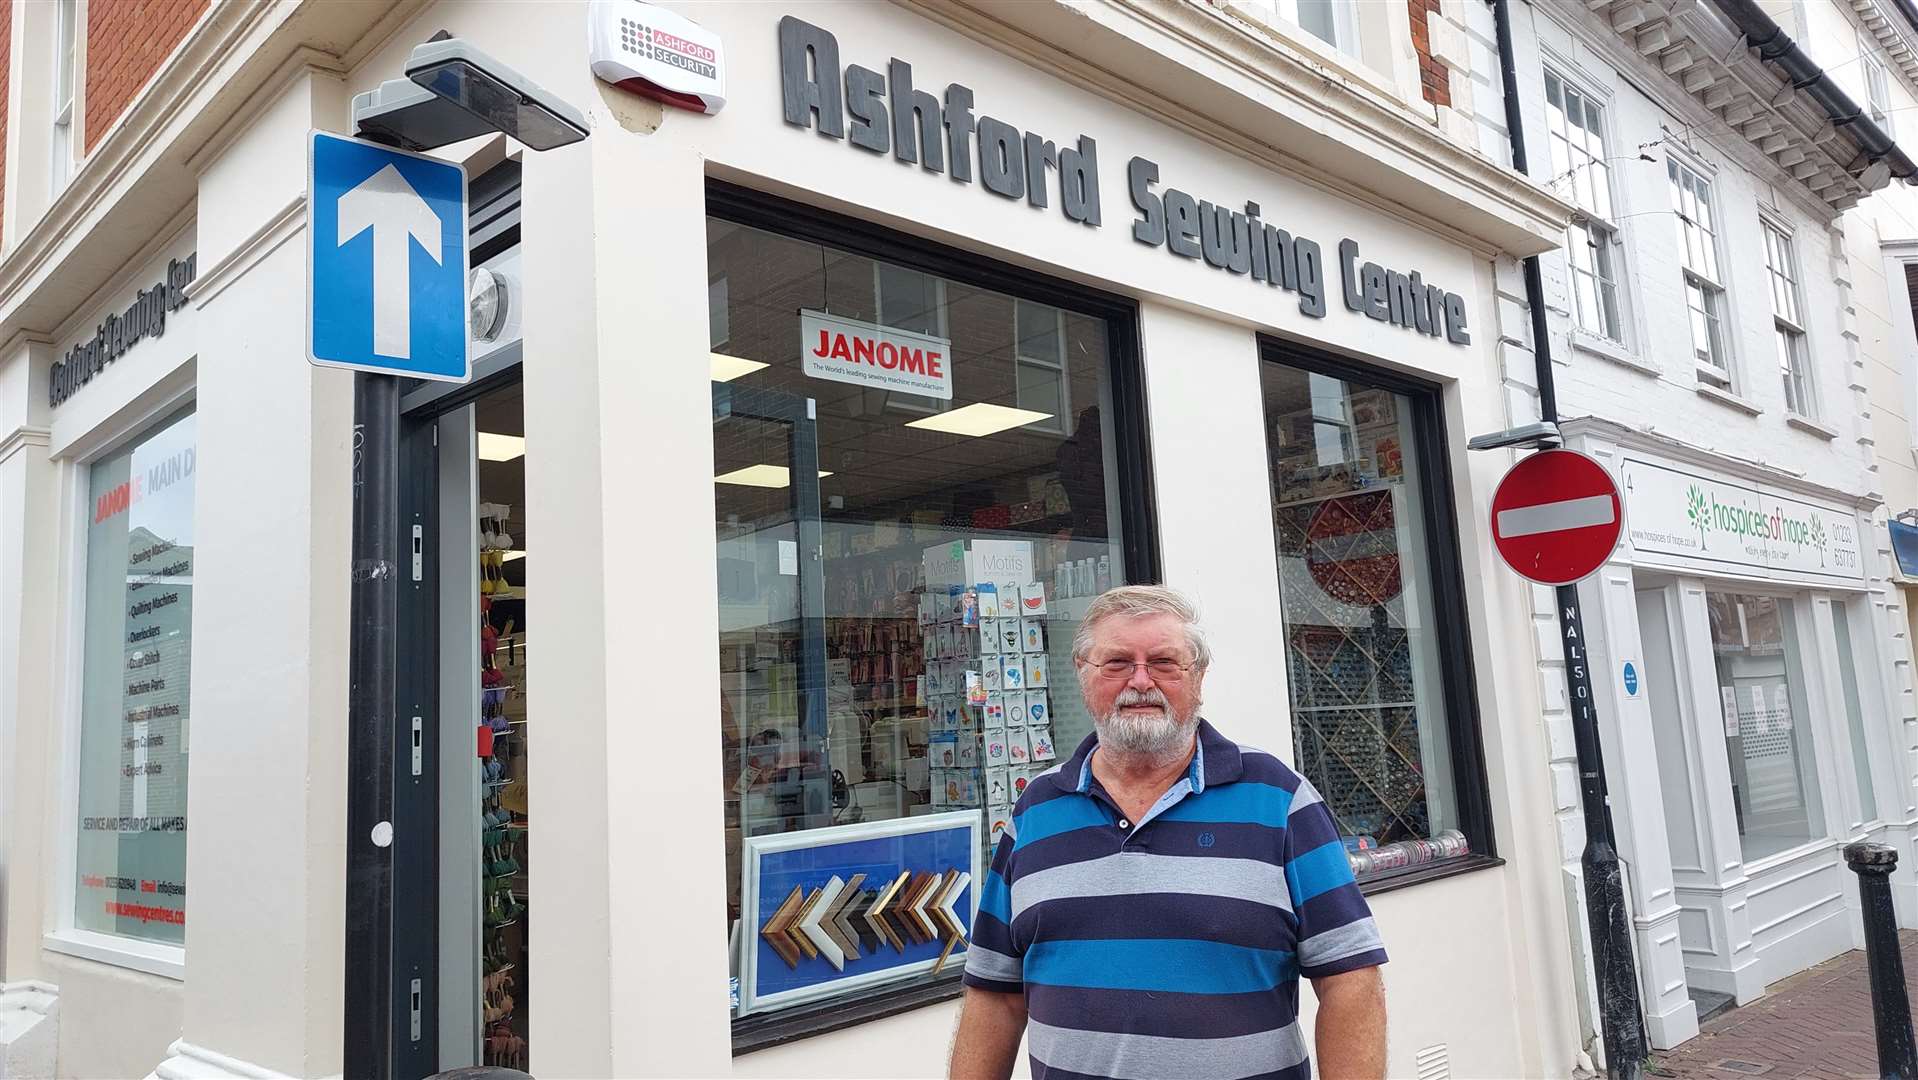 Jim Symes, founder of Ashford Sewing Centre in New Rents